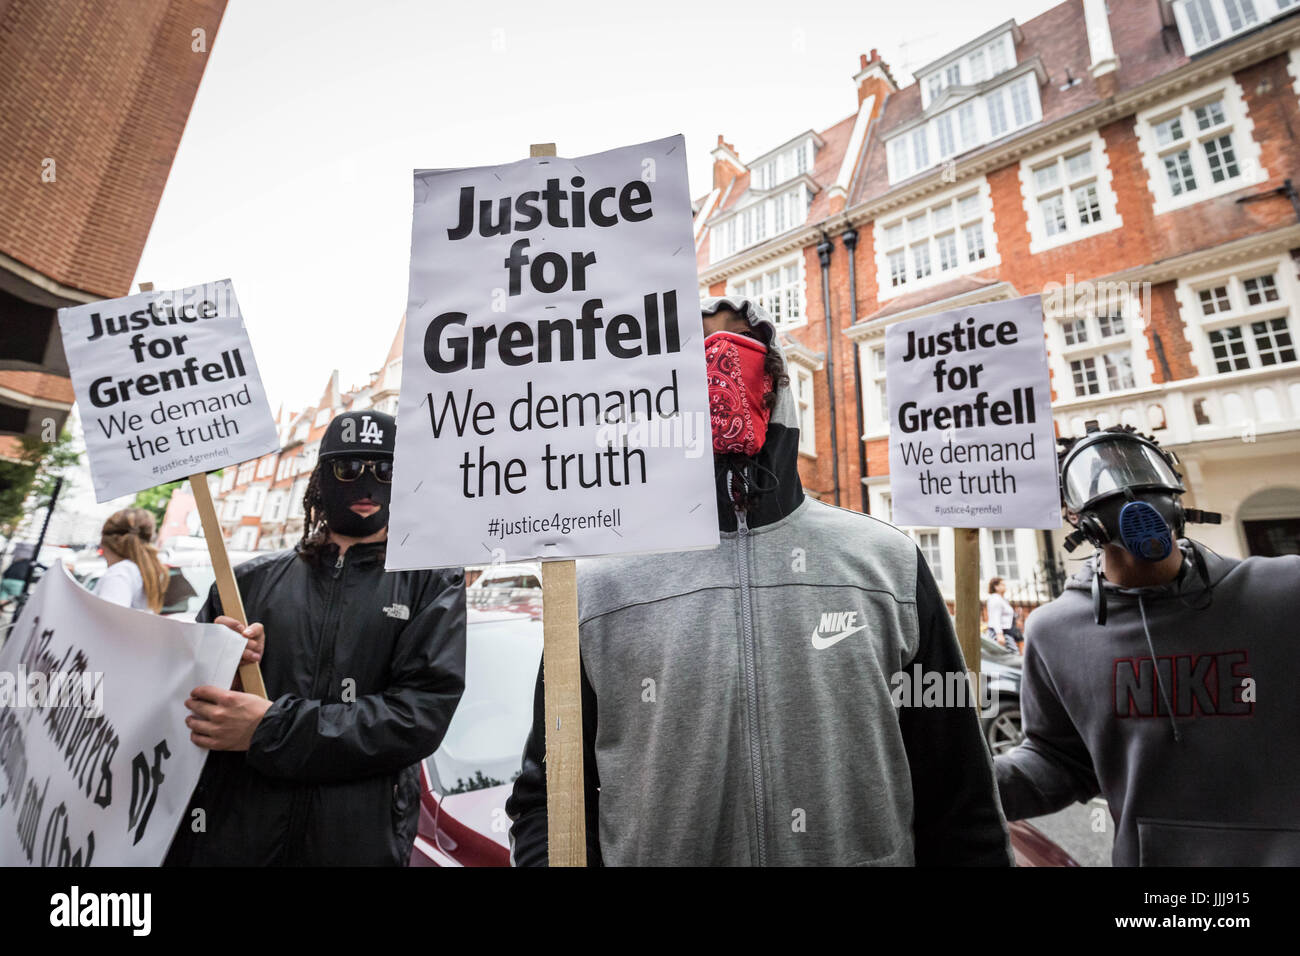 London, UK. 19th July, 2017. Grenfell Tower protest. Hundreds of angry protesters gather outside Kensington town hall ahead of the first full council meeting since the fire disaster. © Guy Corbishley/Alamy Live News Stock Photo